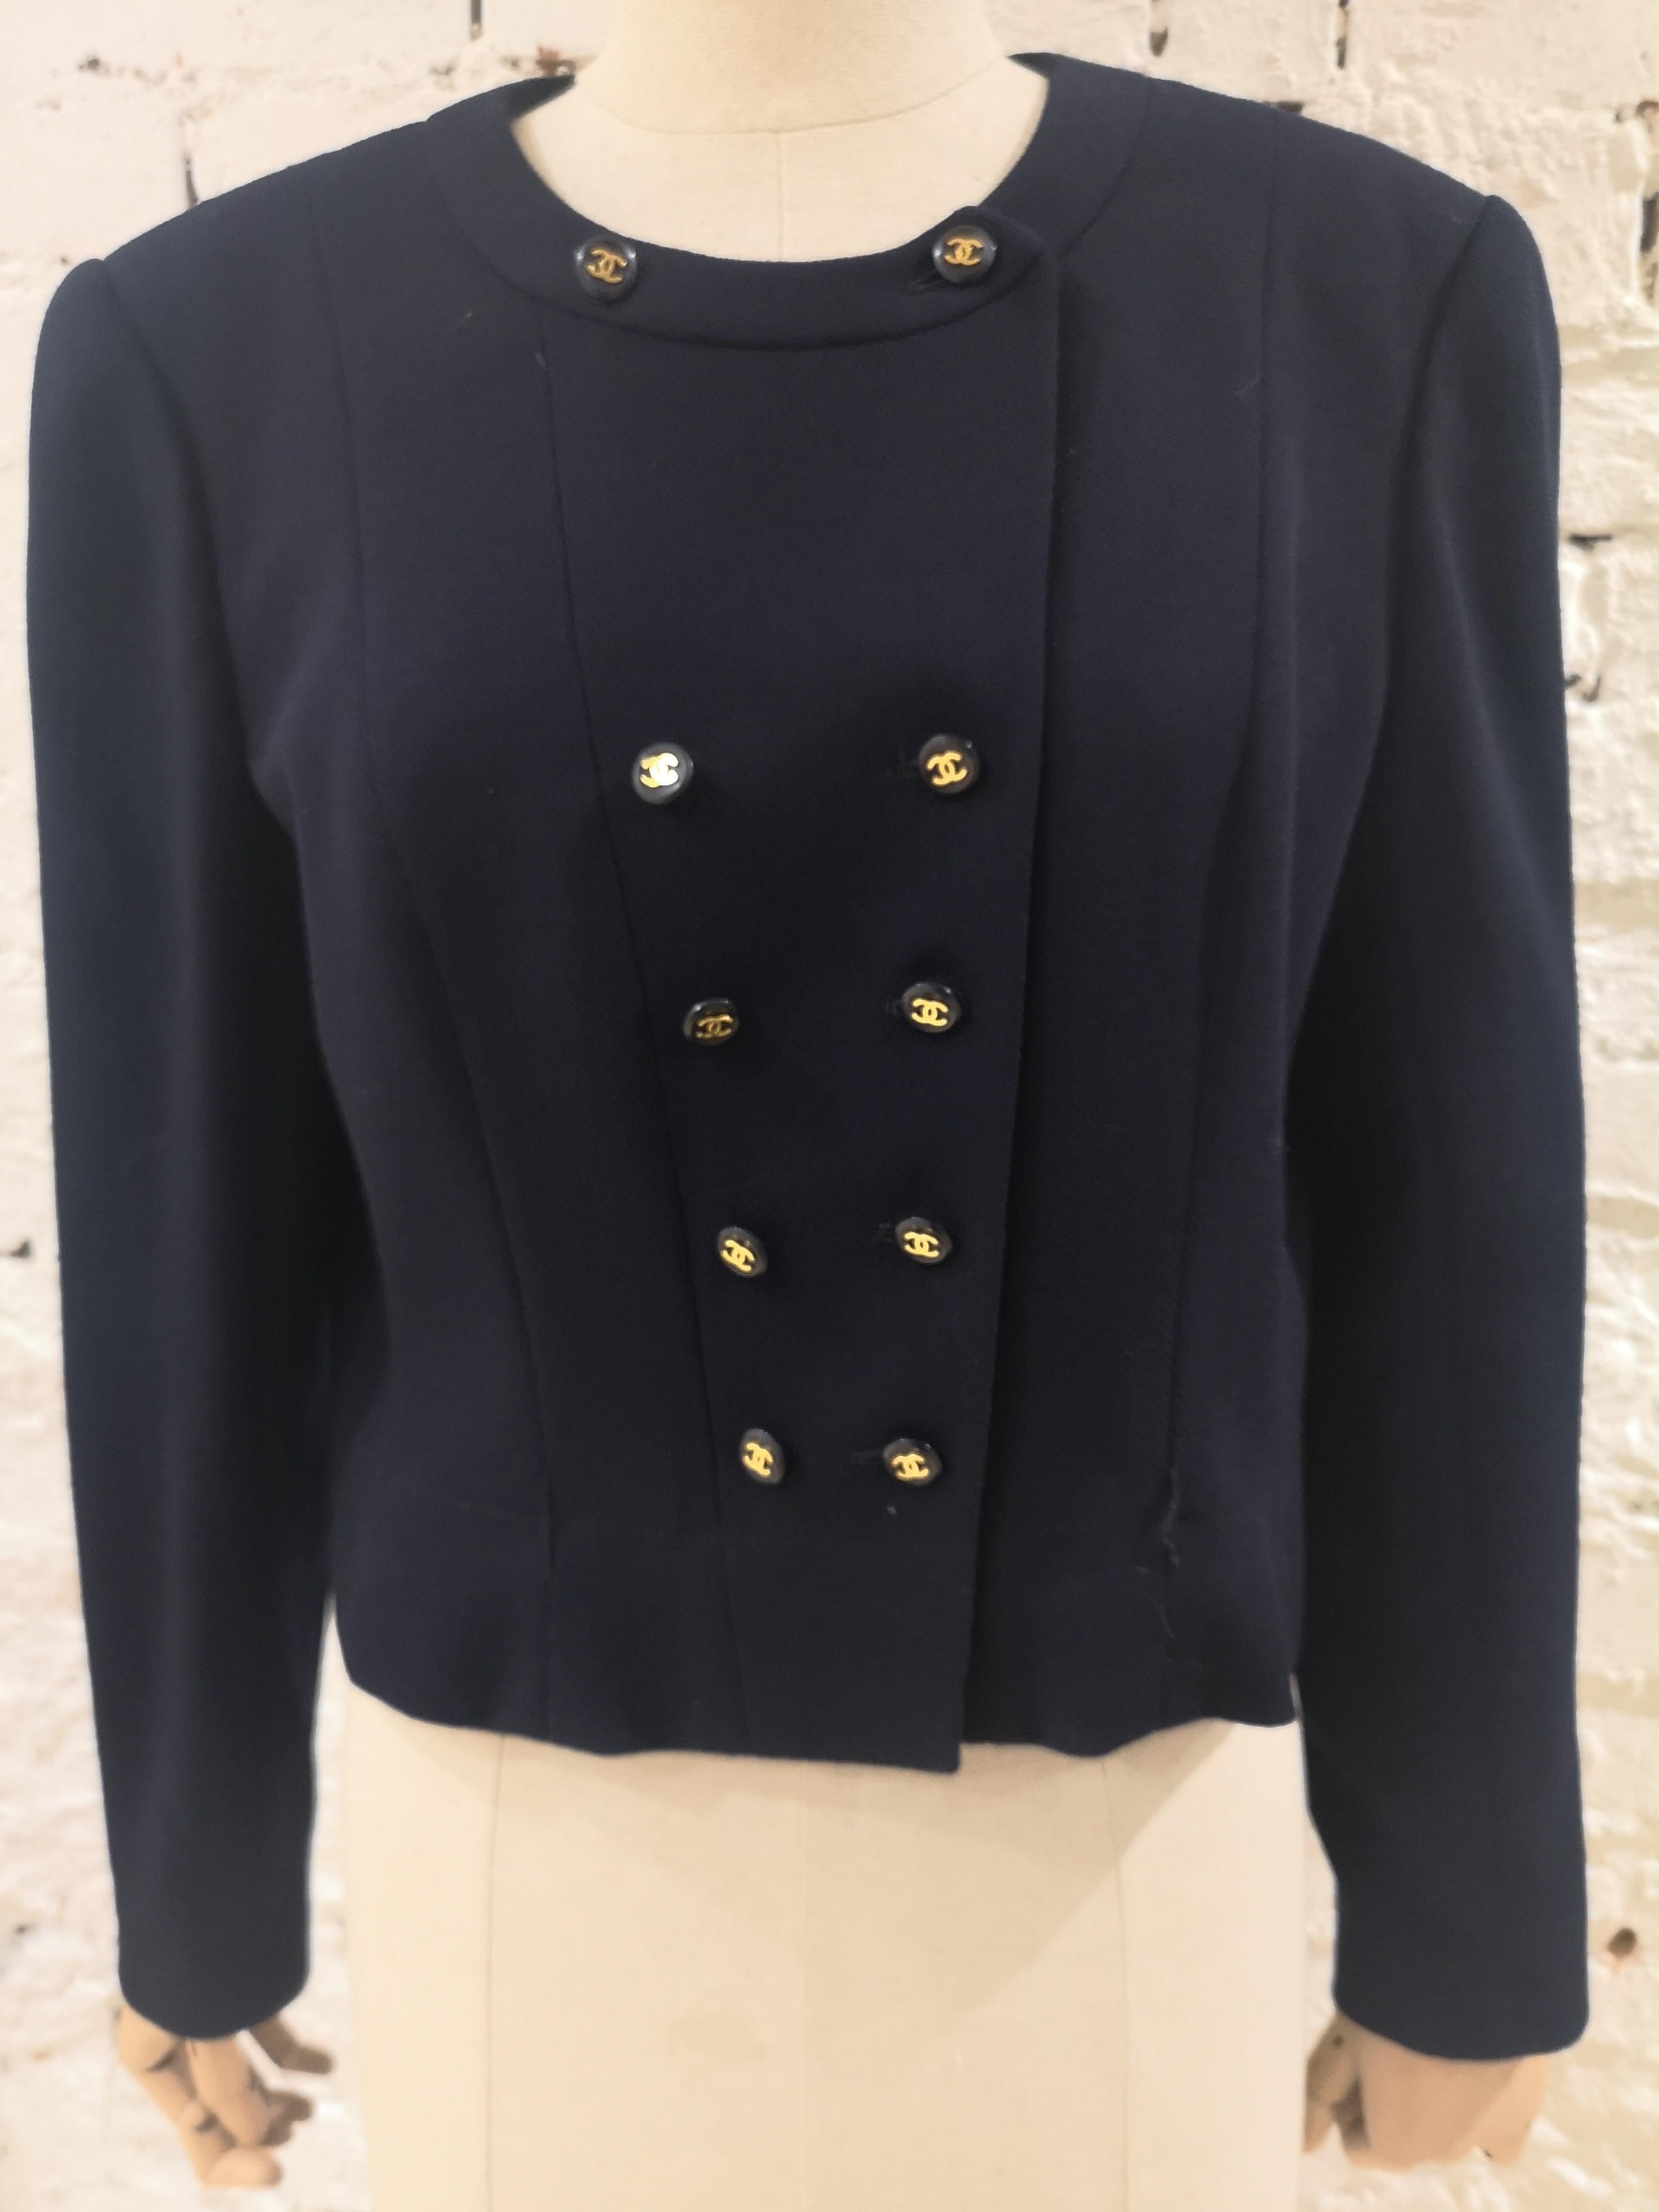 Chanel blue CC logo buttons wool jacket
cc silk lining
totally made in france
embellished with 10 cc logo buttons
size M